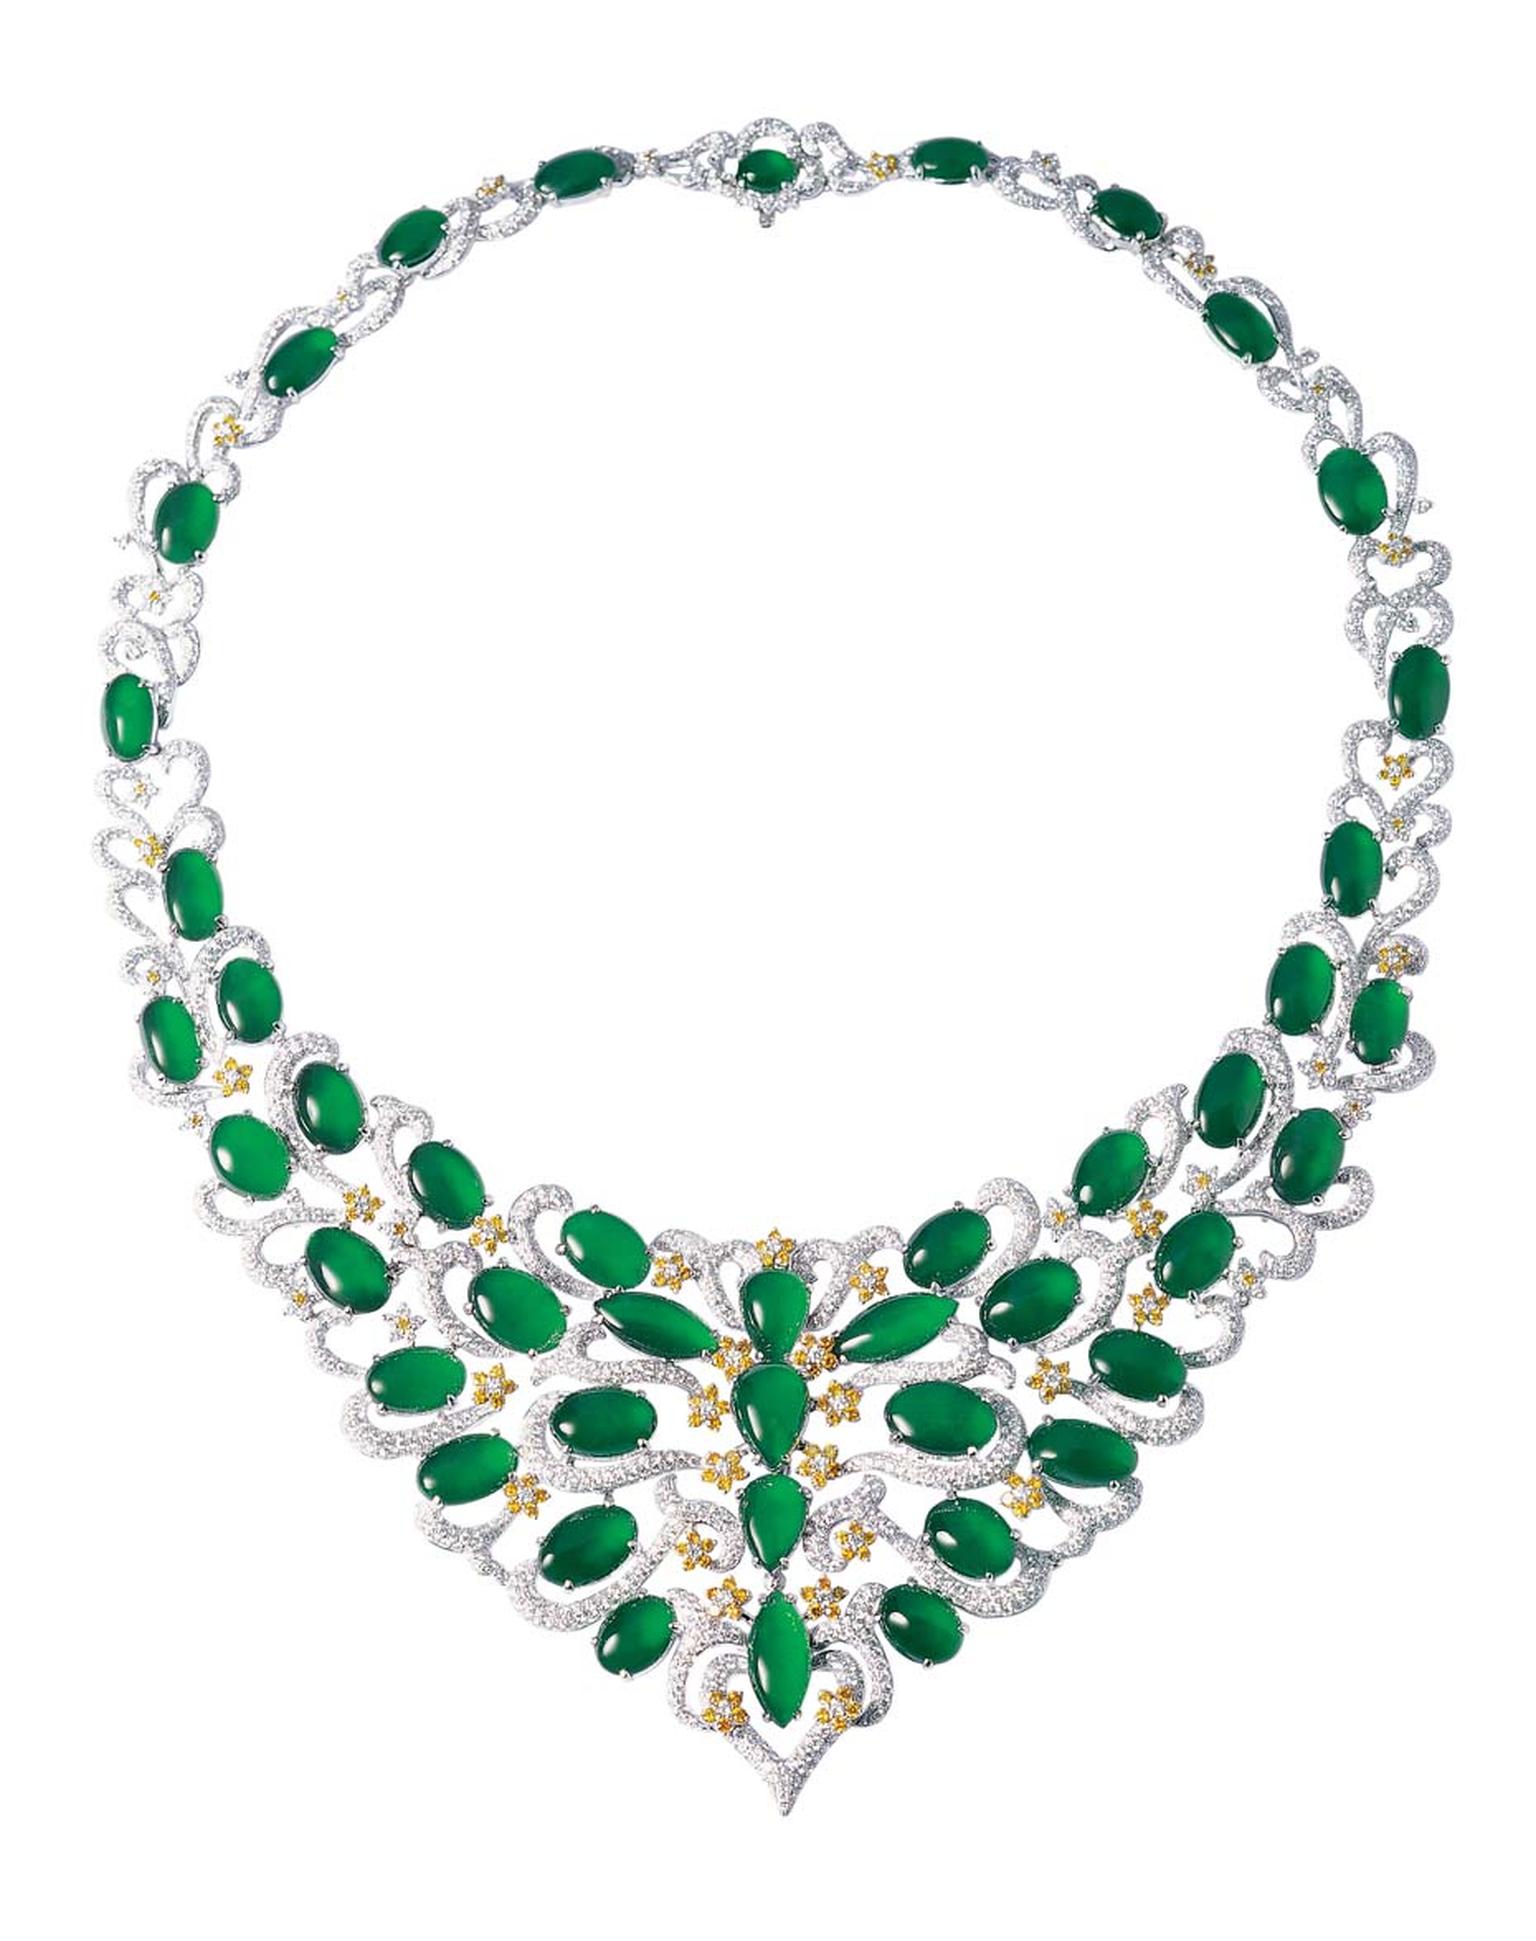 Zhaoyi bib necklace, set with precious, smooth glossy green jade cabochons and diamonds.